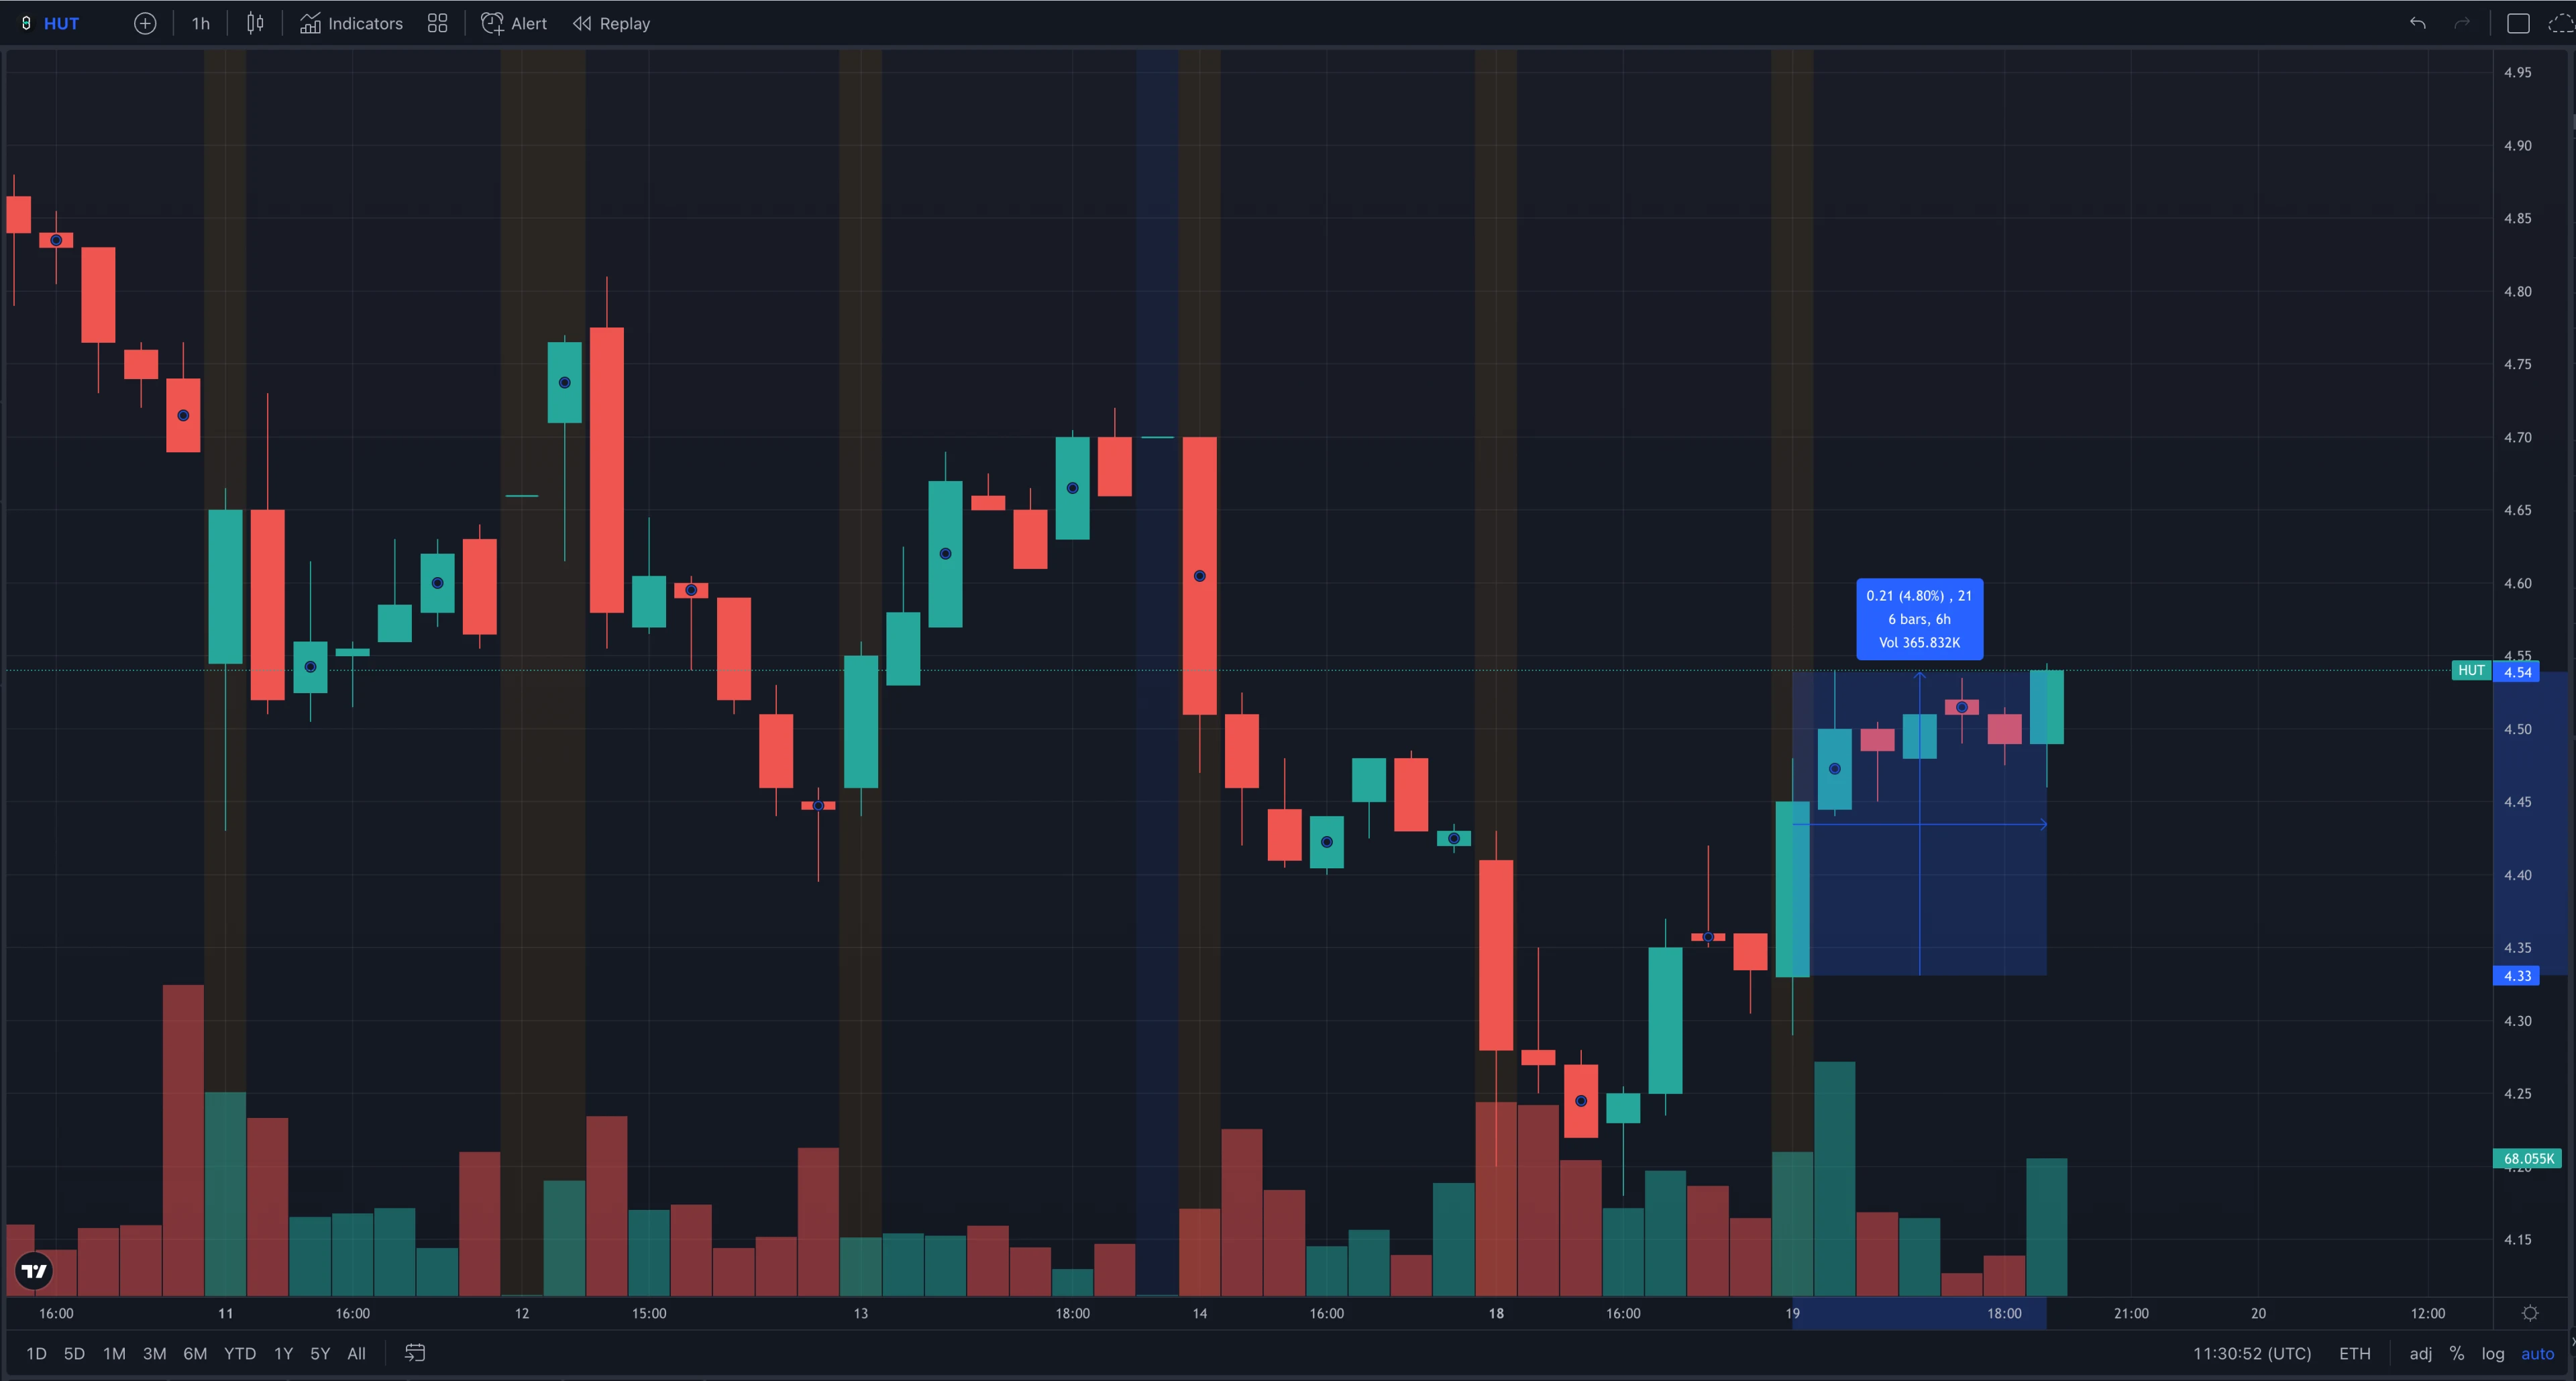 The Tradingview chart illustrating 4.8% price change of Hut 8 shares